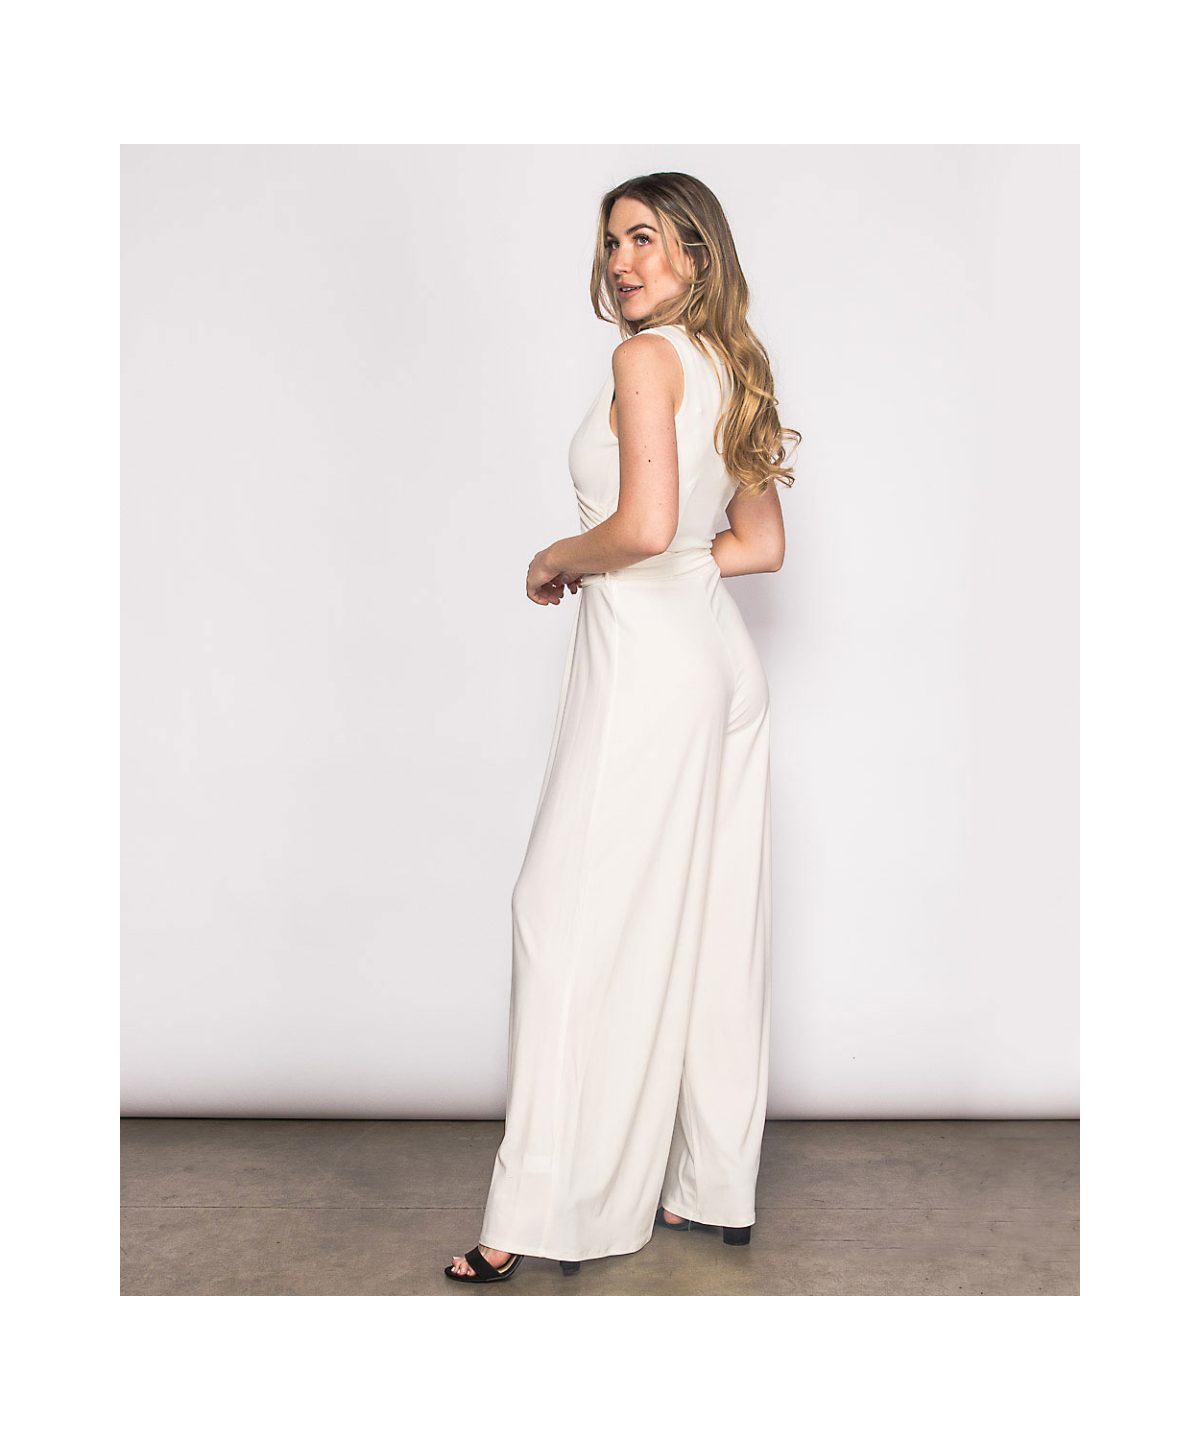 Last Tango MS522 Ivory Women's Jumpsuit | Ooh Ooh Shoes women's clothing and shoe boutique located in Naples and Mashpee